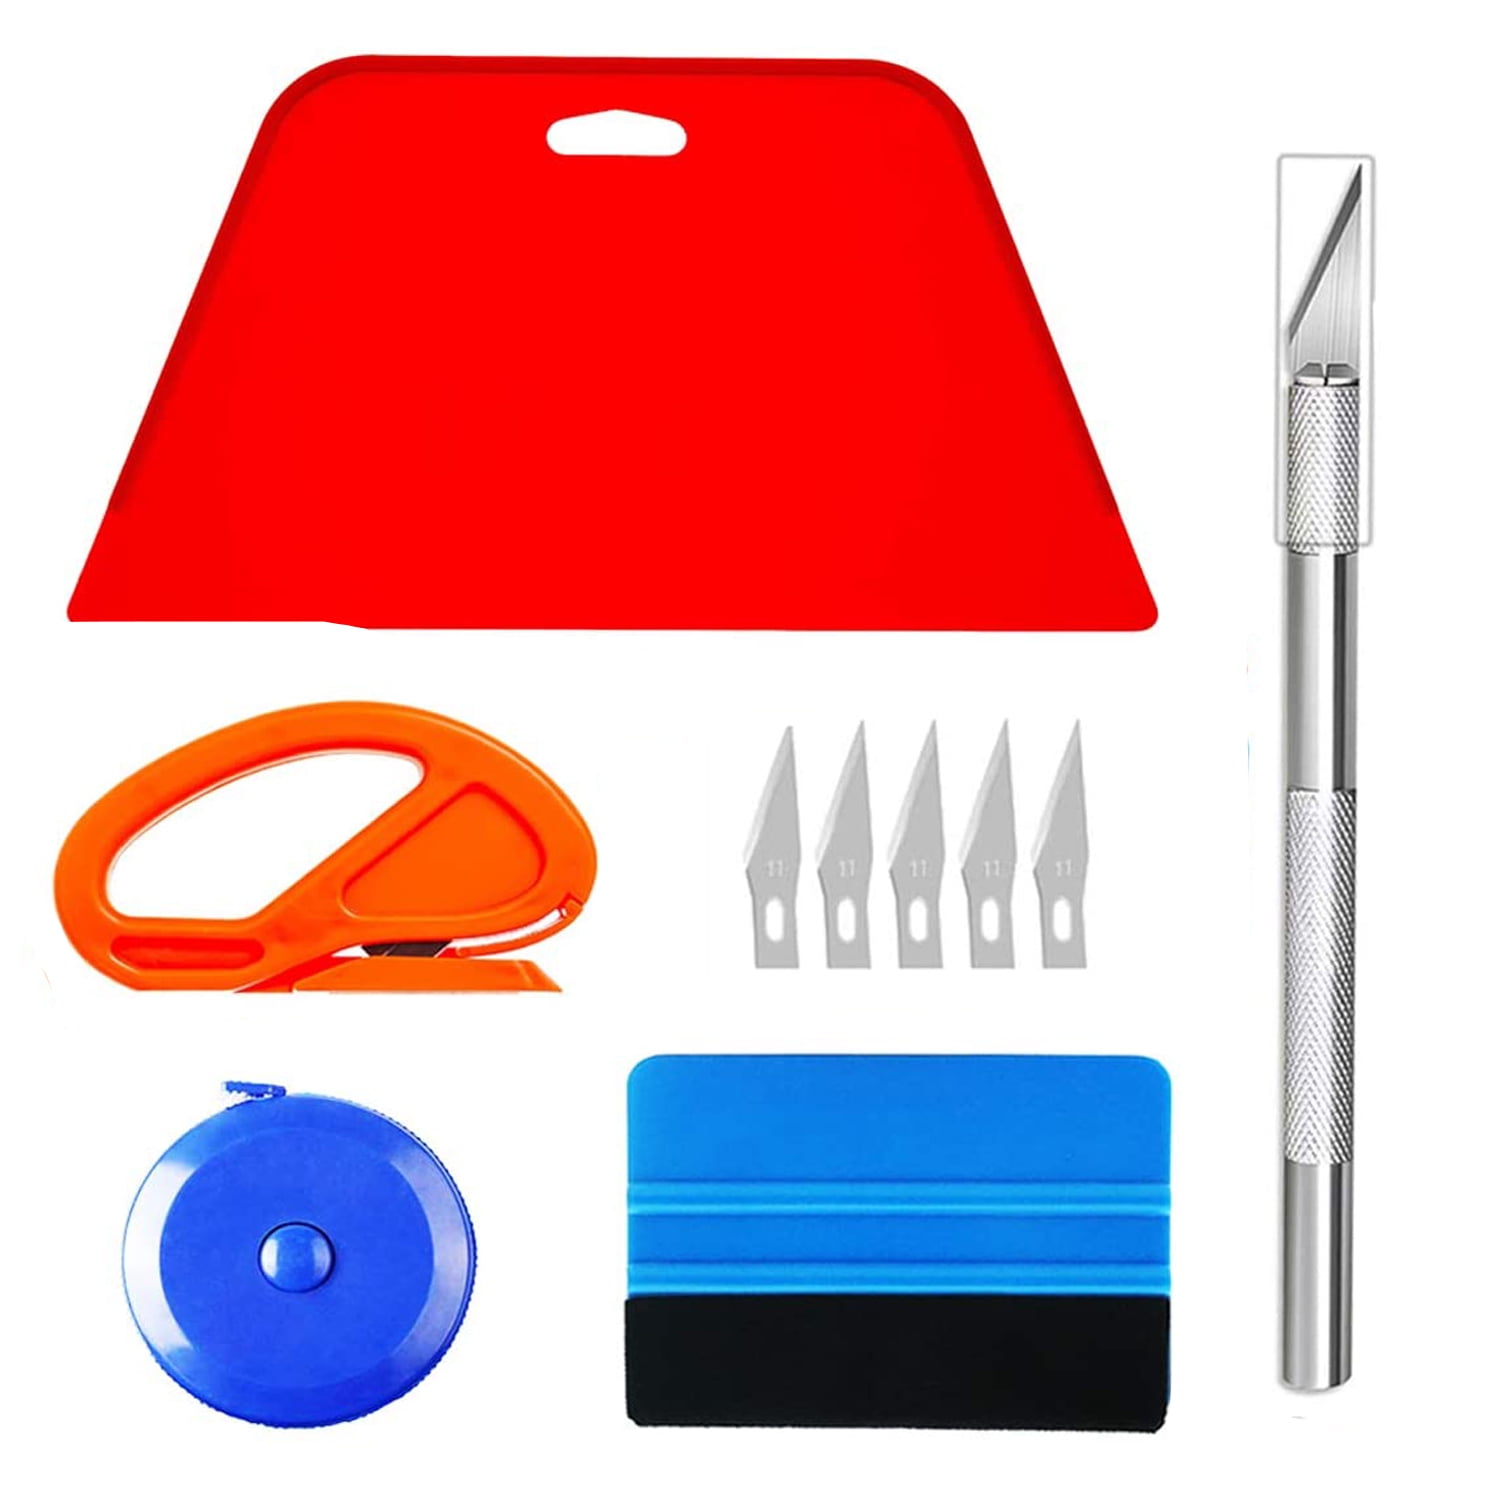 WRAPXPERT Wallpaper Tools,Wallpaper Smoothing Tool Kit for Peel and  Stick,Hanging Tool Kits with Squeegee Smoother,Seam Roller for Contact  Paper,Vinyl